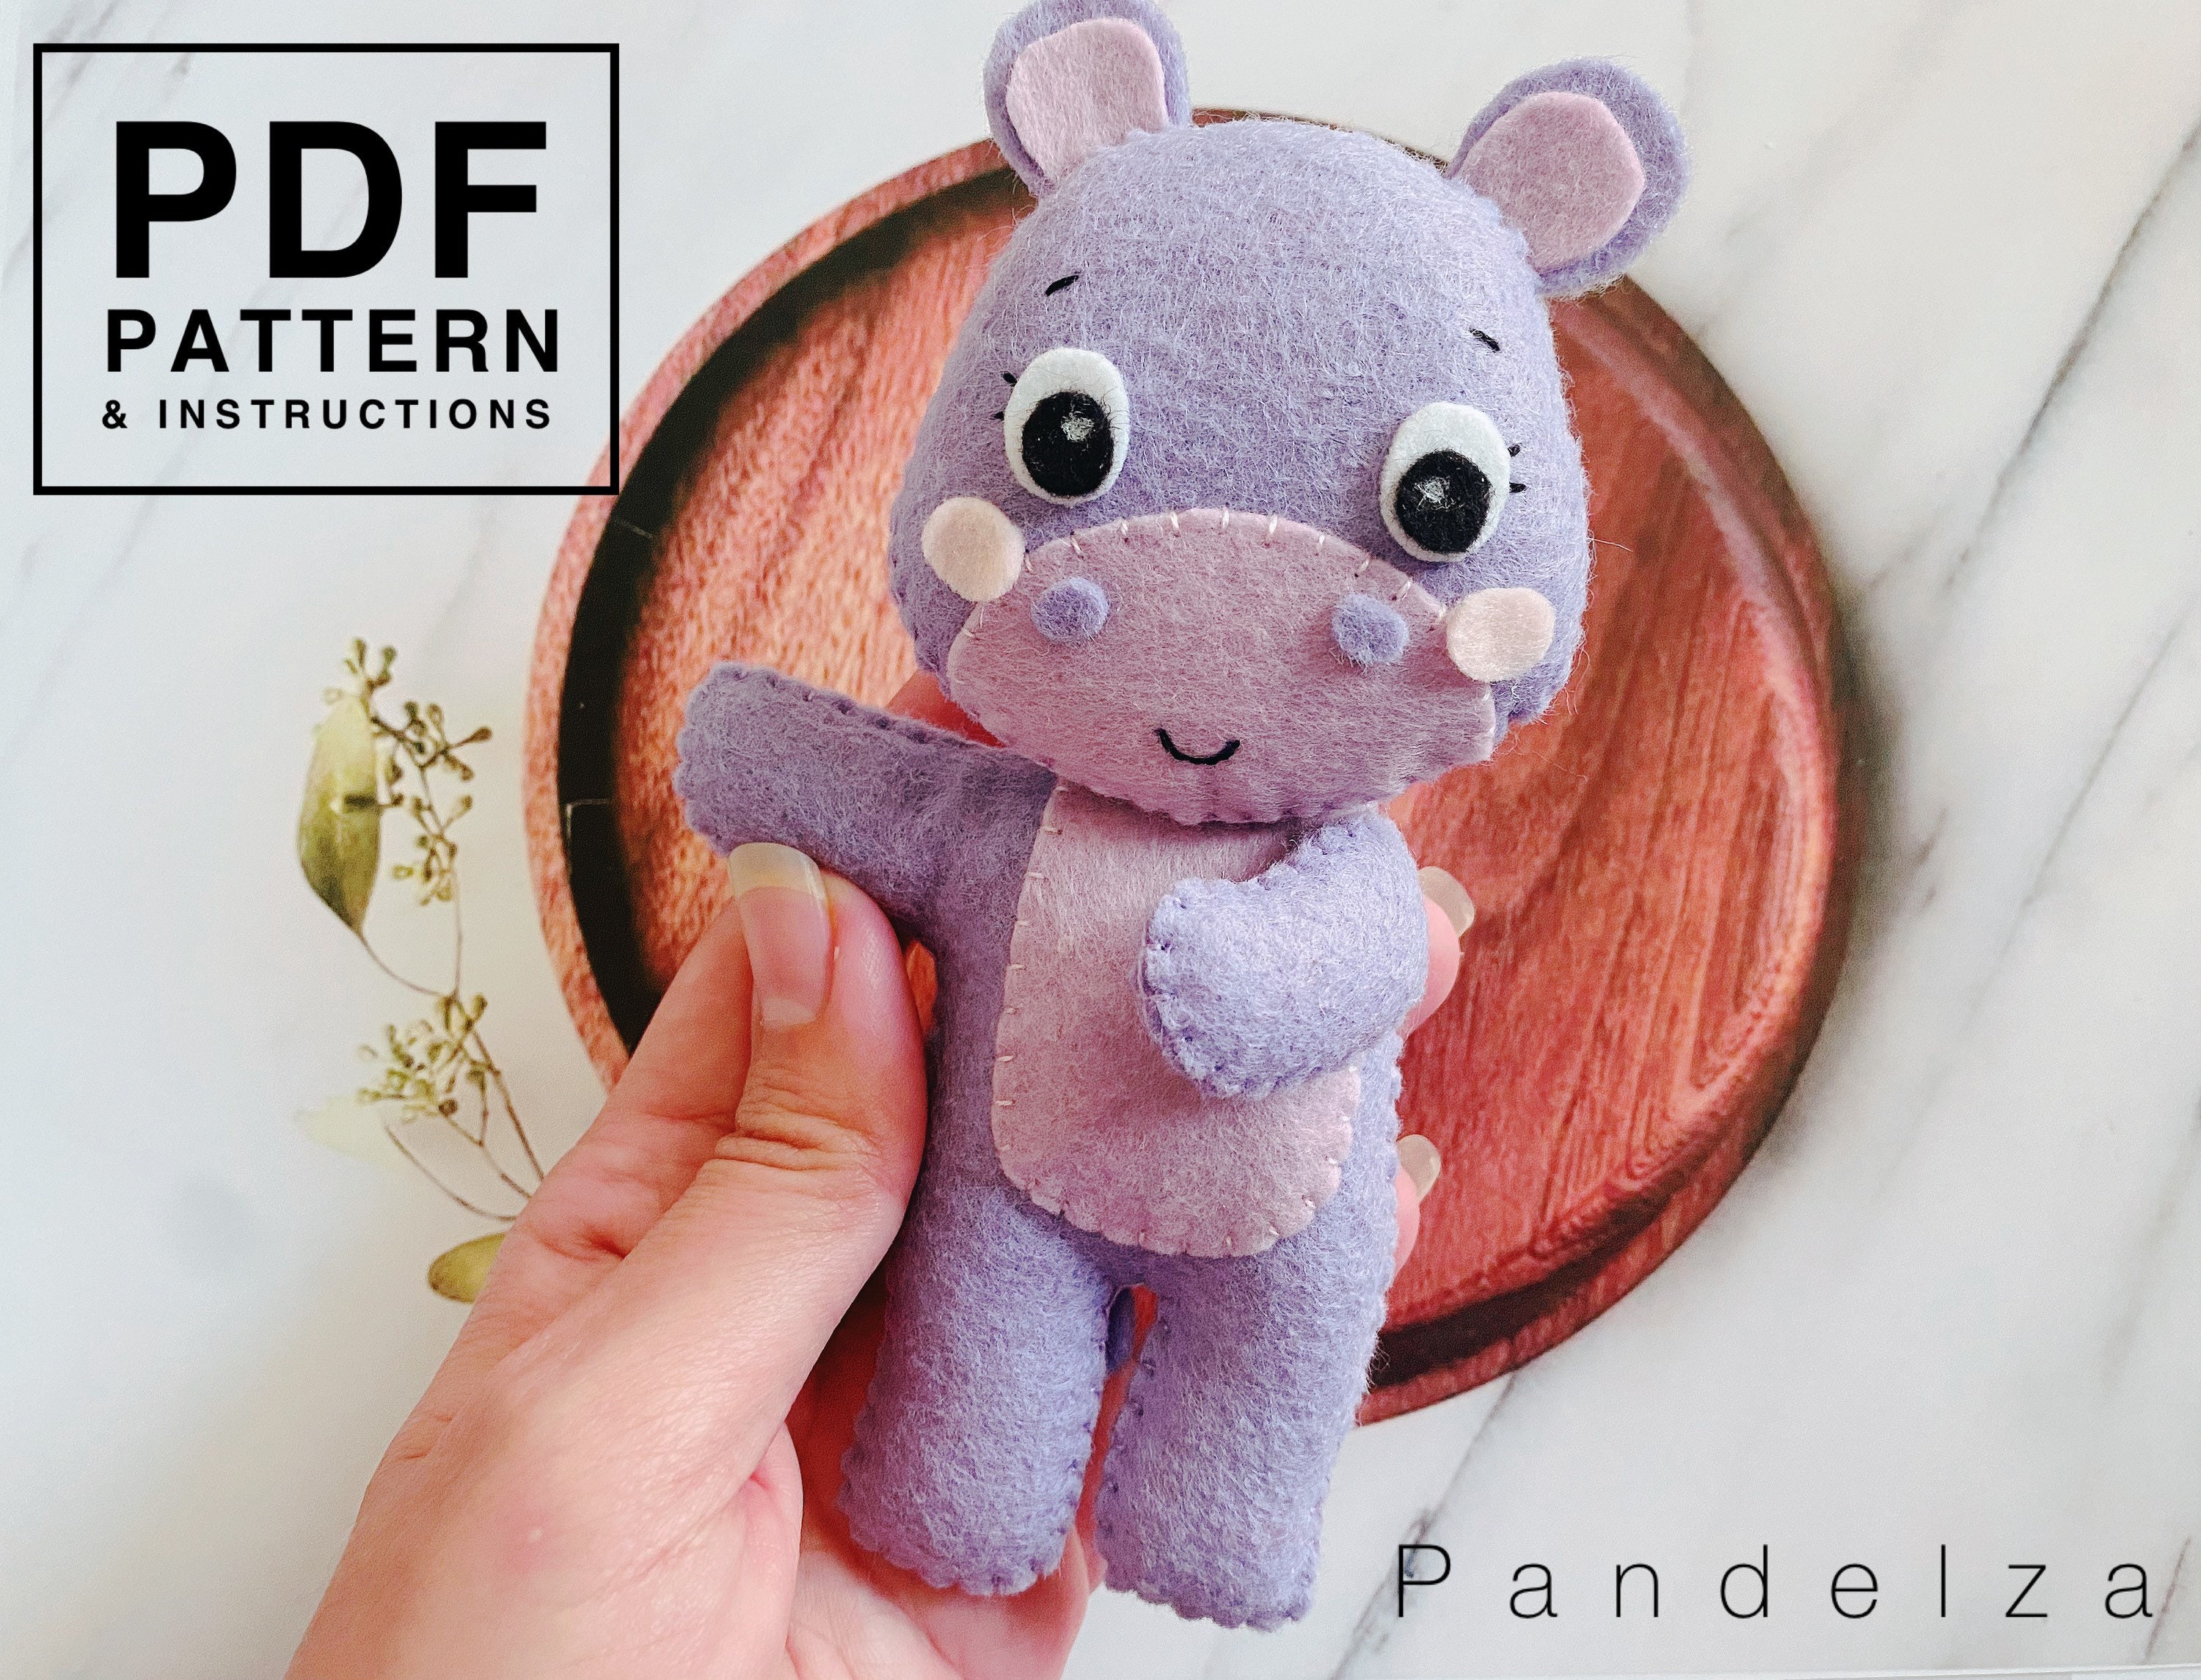 Rainbow Friends Blue PDF Pattern. DIY Roblox Monster Felt Pattern. Easy  Hand Sewing Pattern With Tutorial. Great DIY Gift for Kids. 